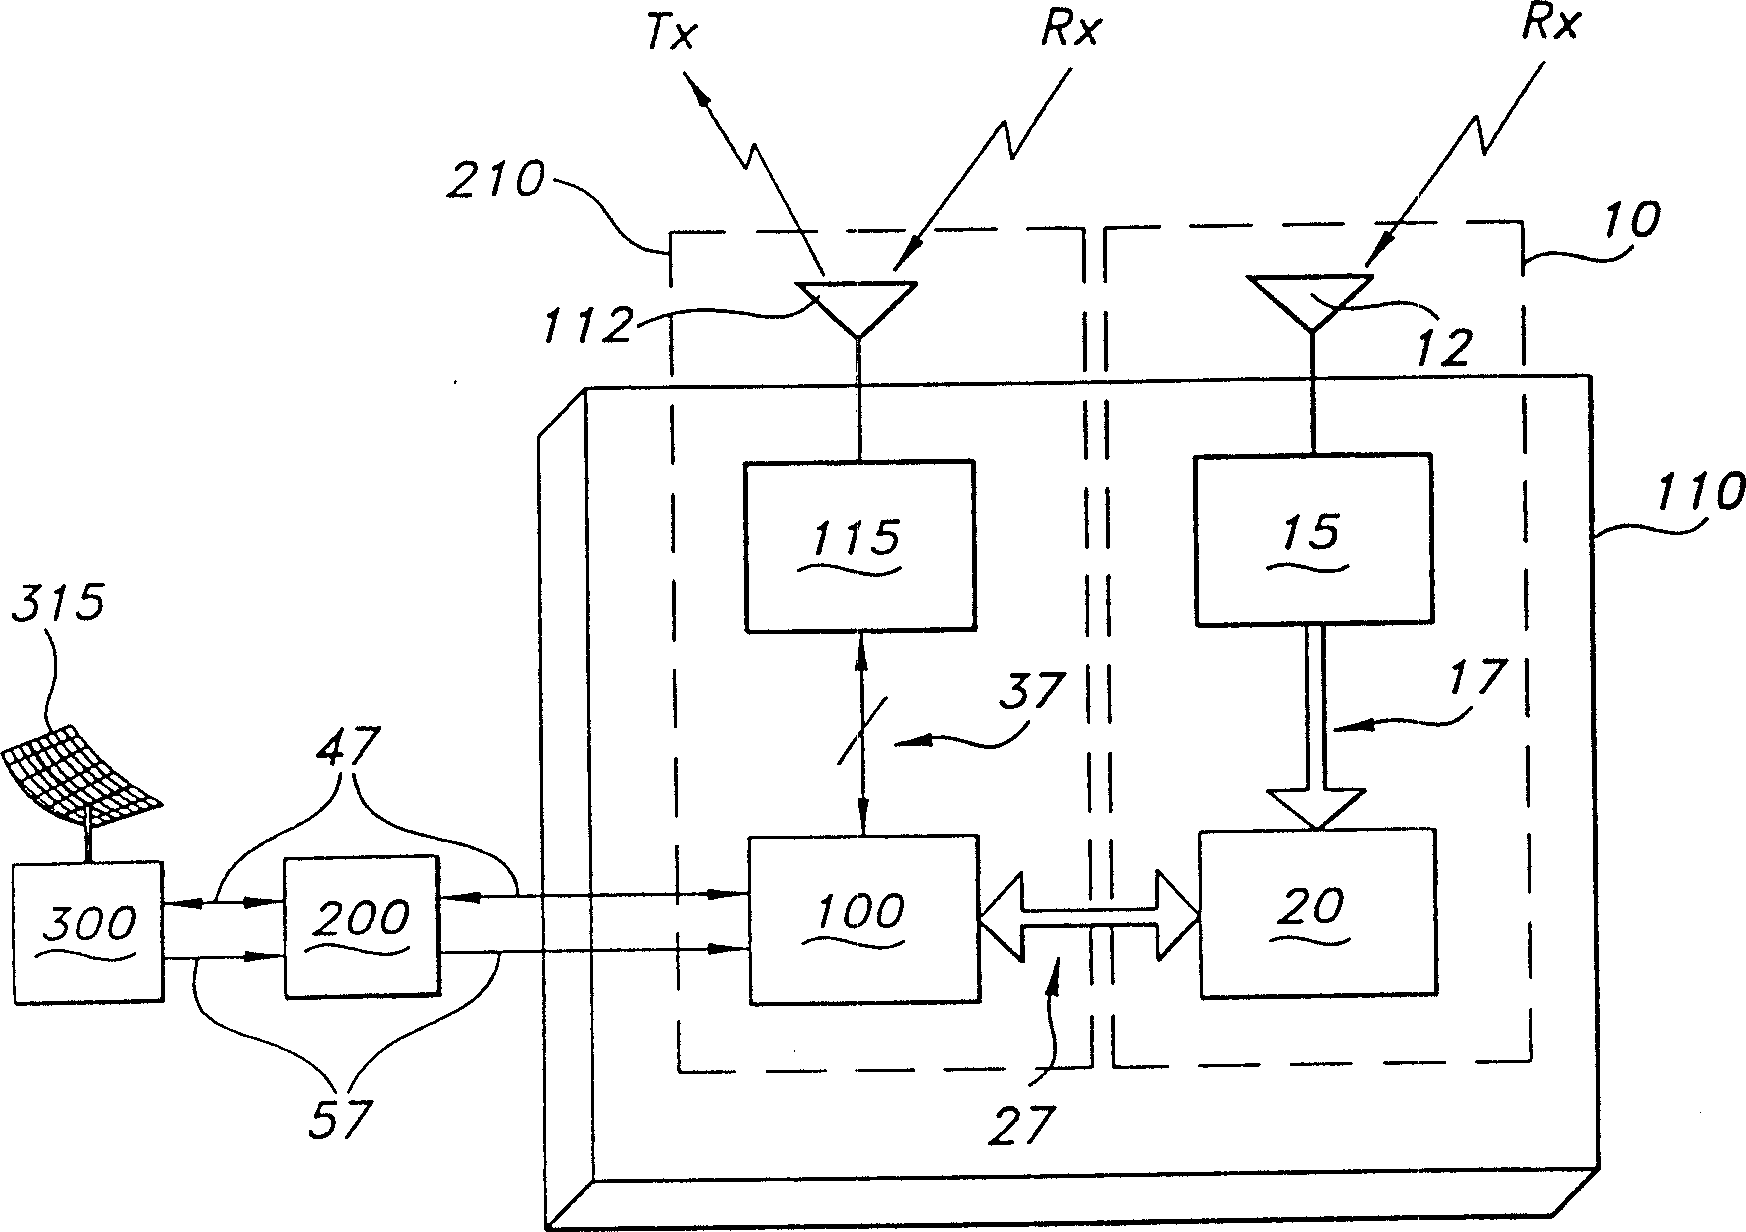 Integrated data links in a surveillance receiver